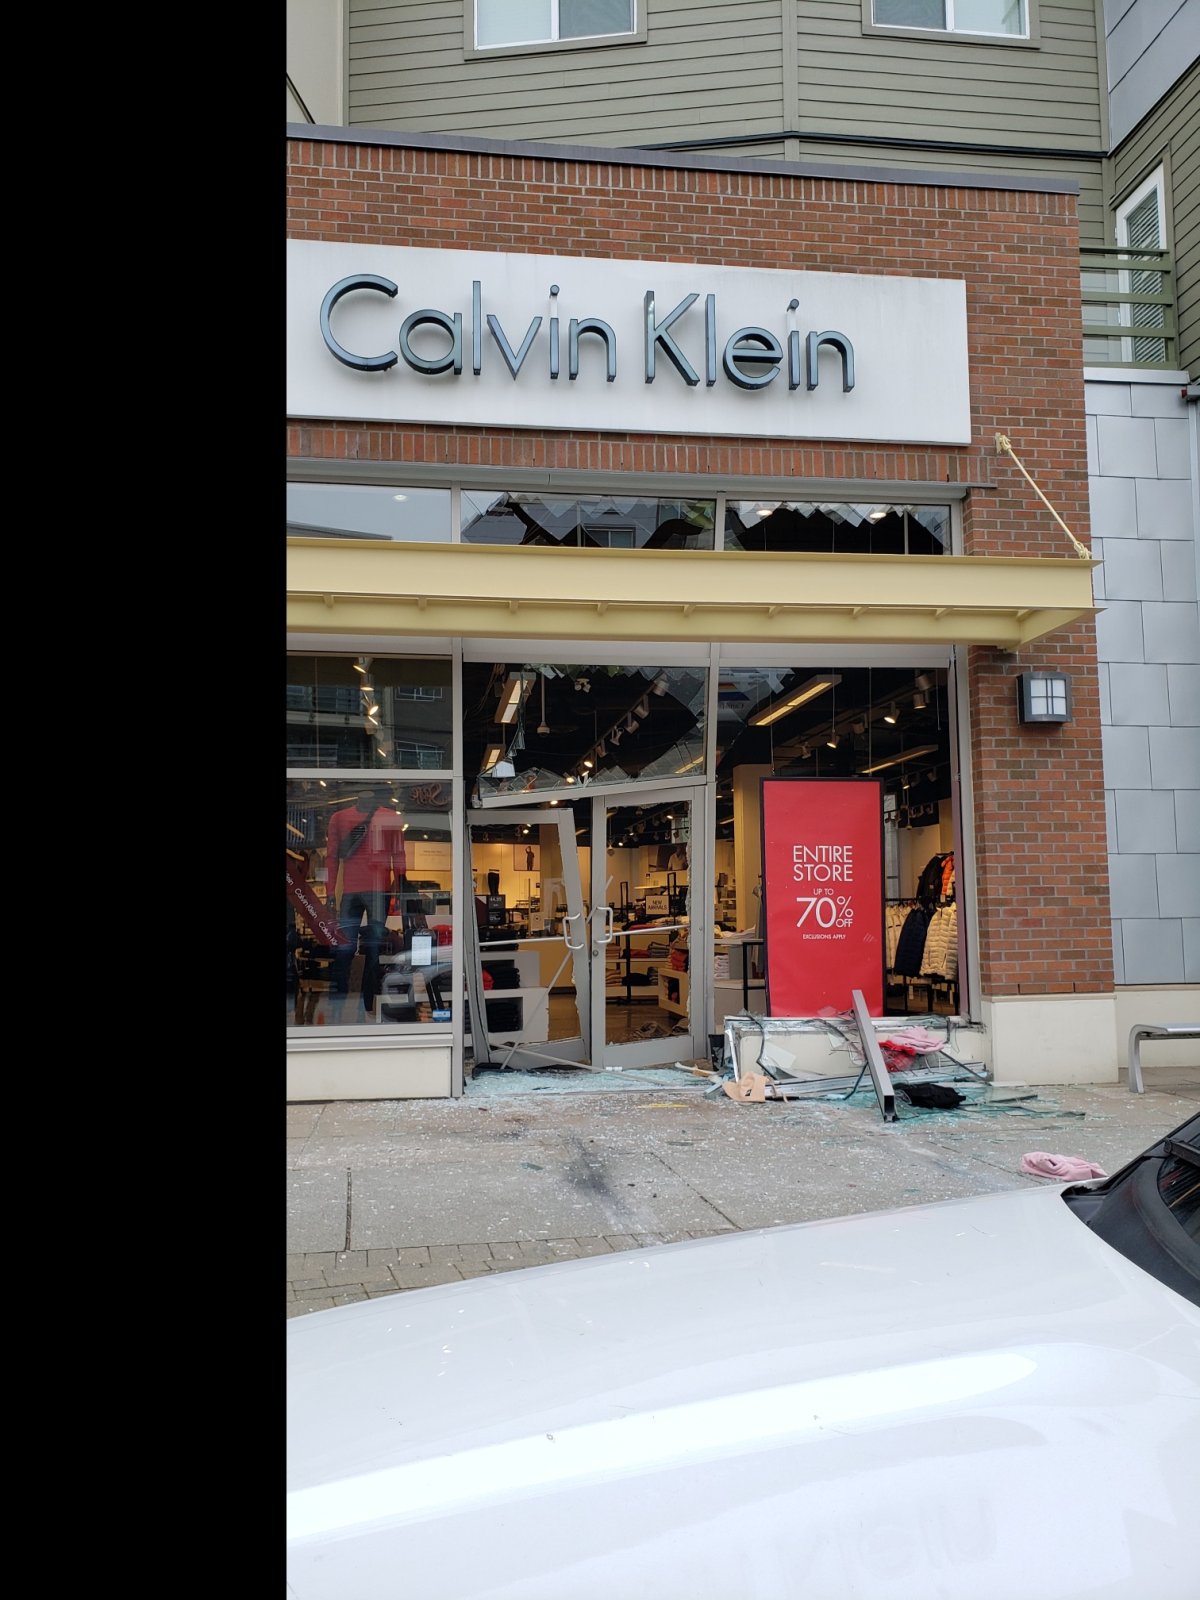 Surrey RCMP are investigating after a vehicle was used to break into a Calvin Klein shop in Surrey, B.C. on Dec. 21, 2021.